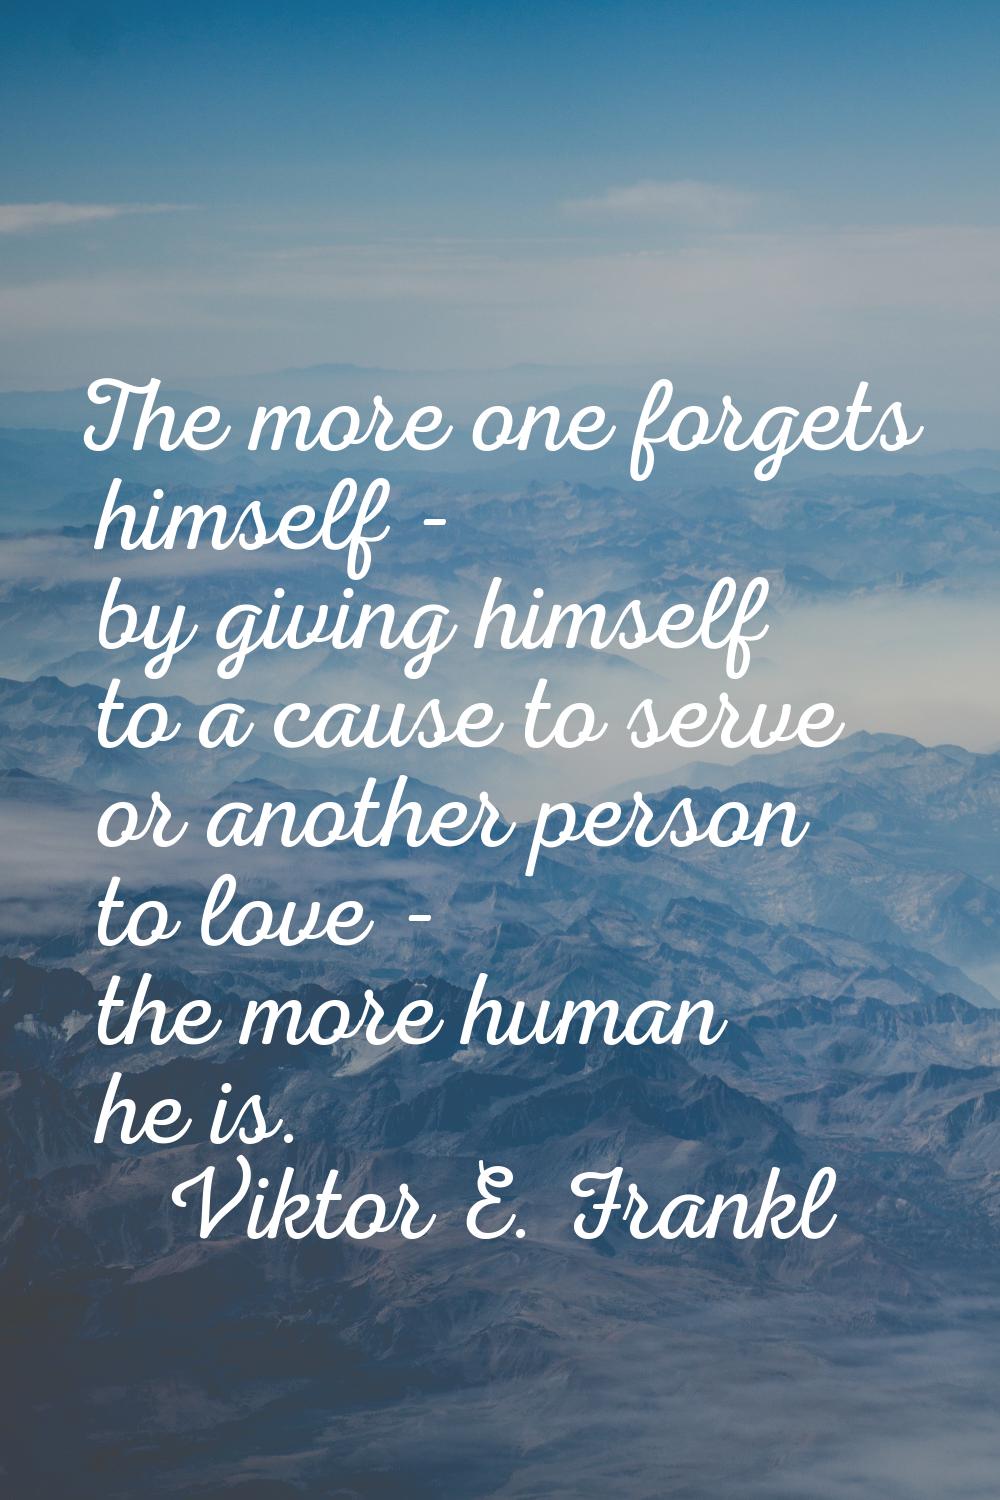 The more one forgets himself - by giving himself to a cause to serve or another person to love - th